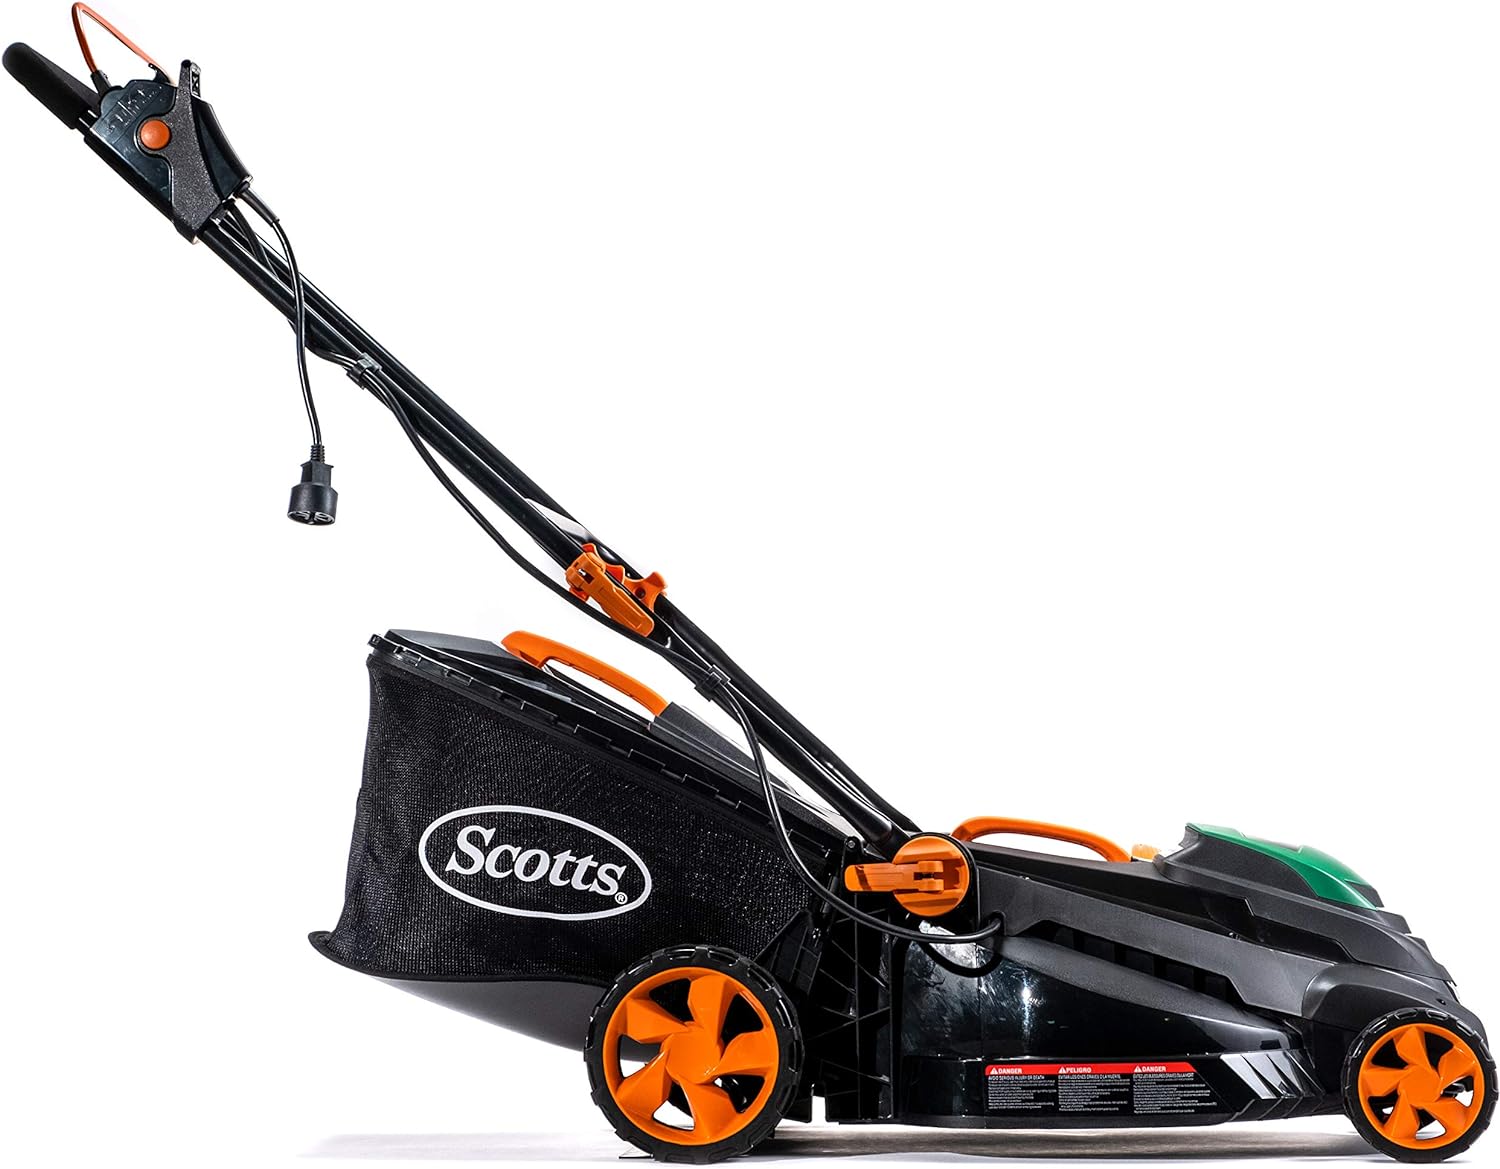 Scotts Outdoor Power Tools 51519S 19-Inch 13-Amp Corded Electric Lawn Mower